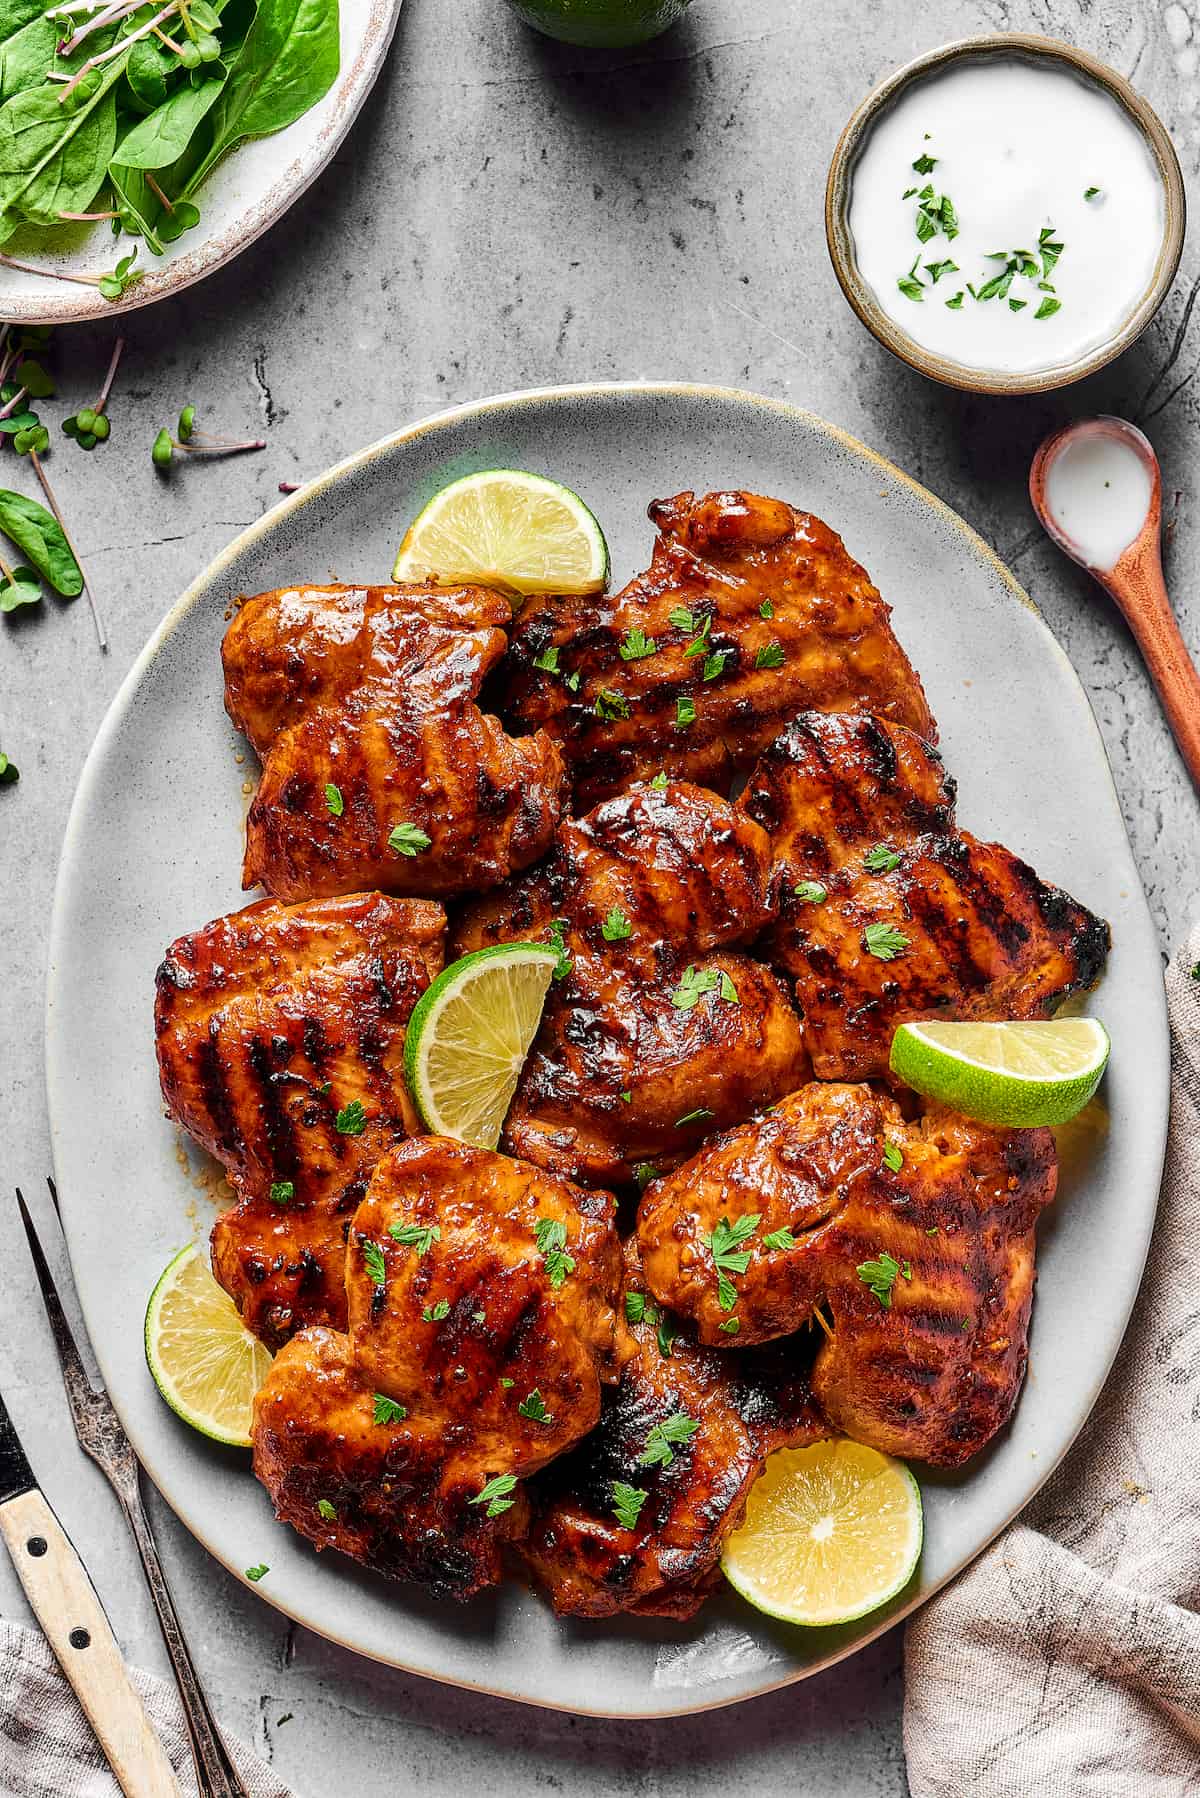 An oval platter of grilled chicken thighs, garnished with parsley and lime wedges.